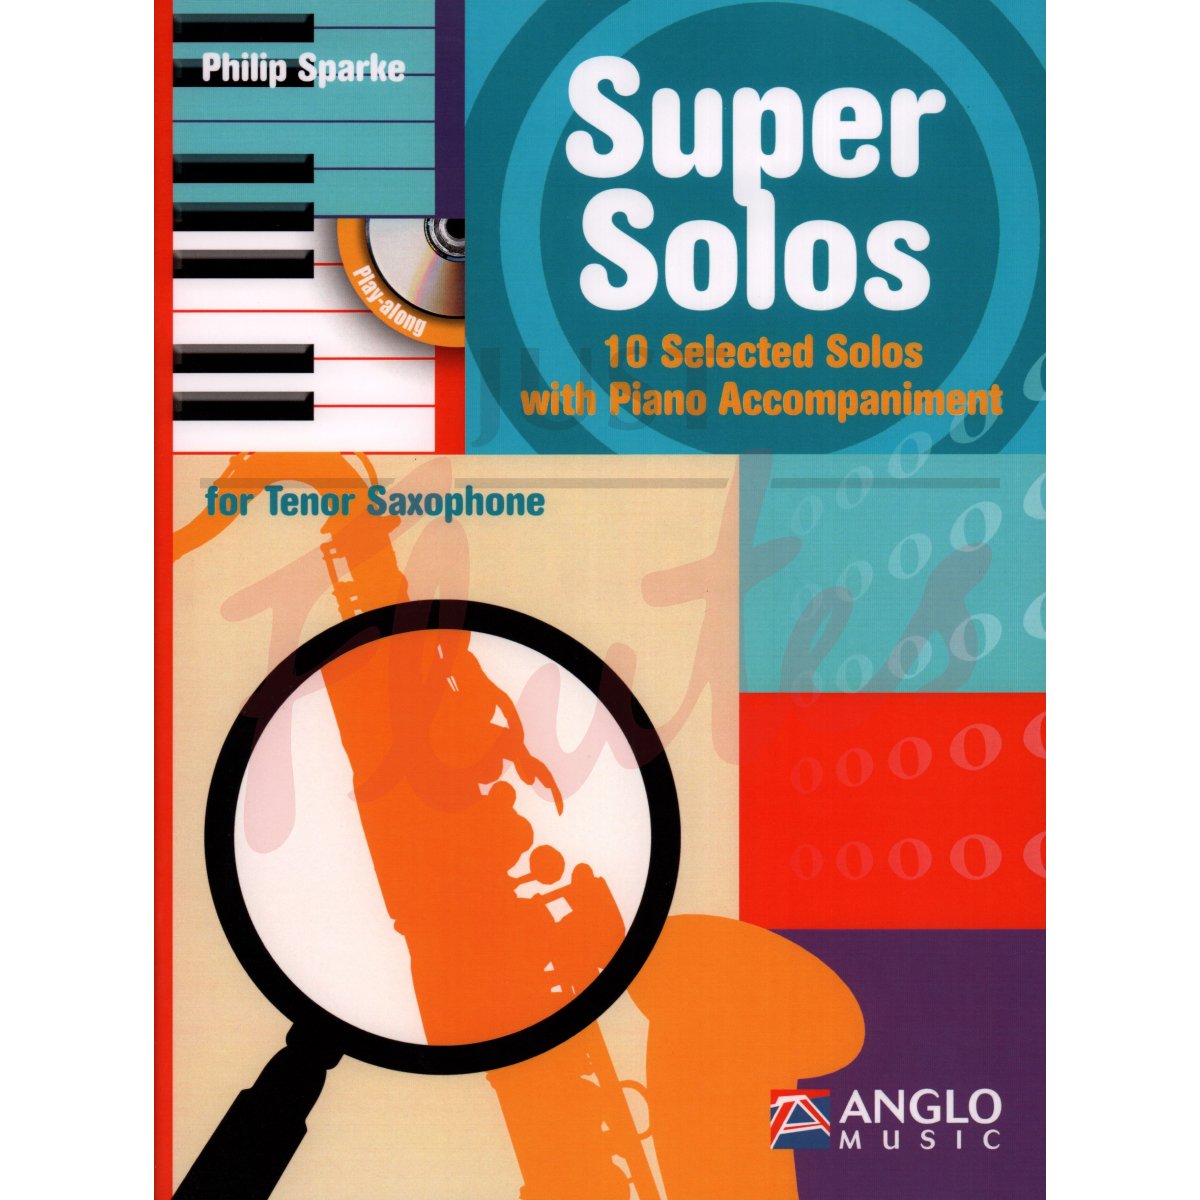 Super Solos for Tenor Saxophone with Piano Accompaniment